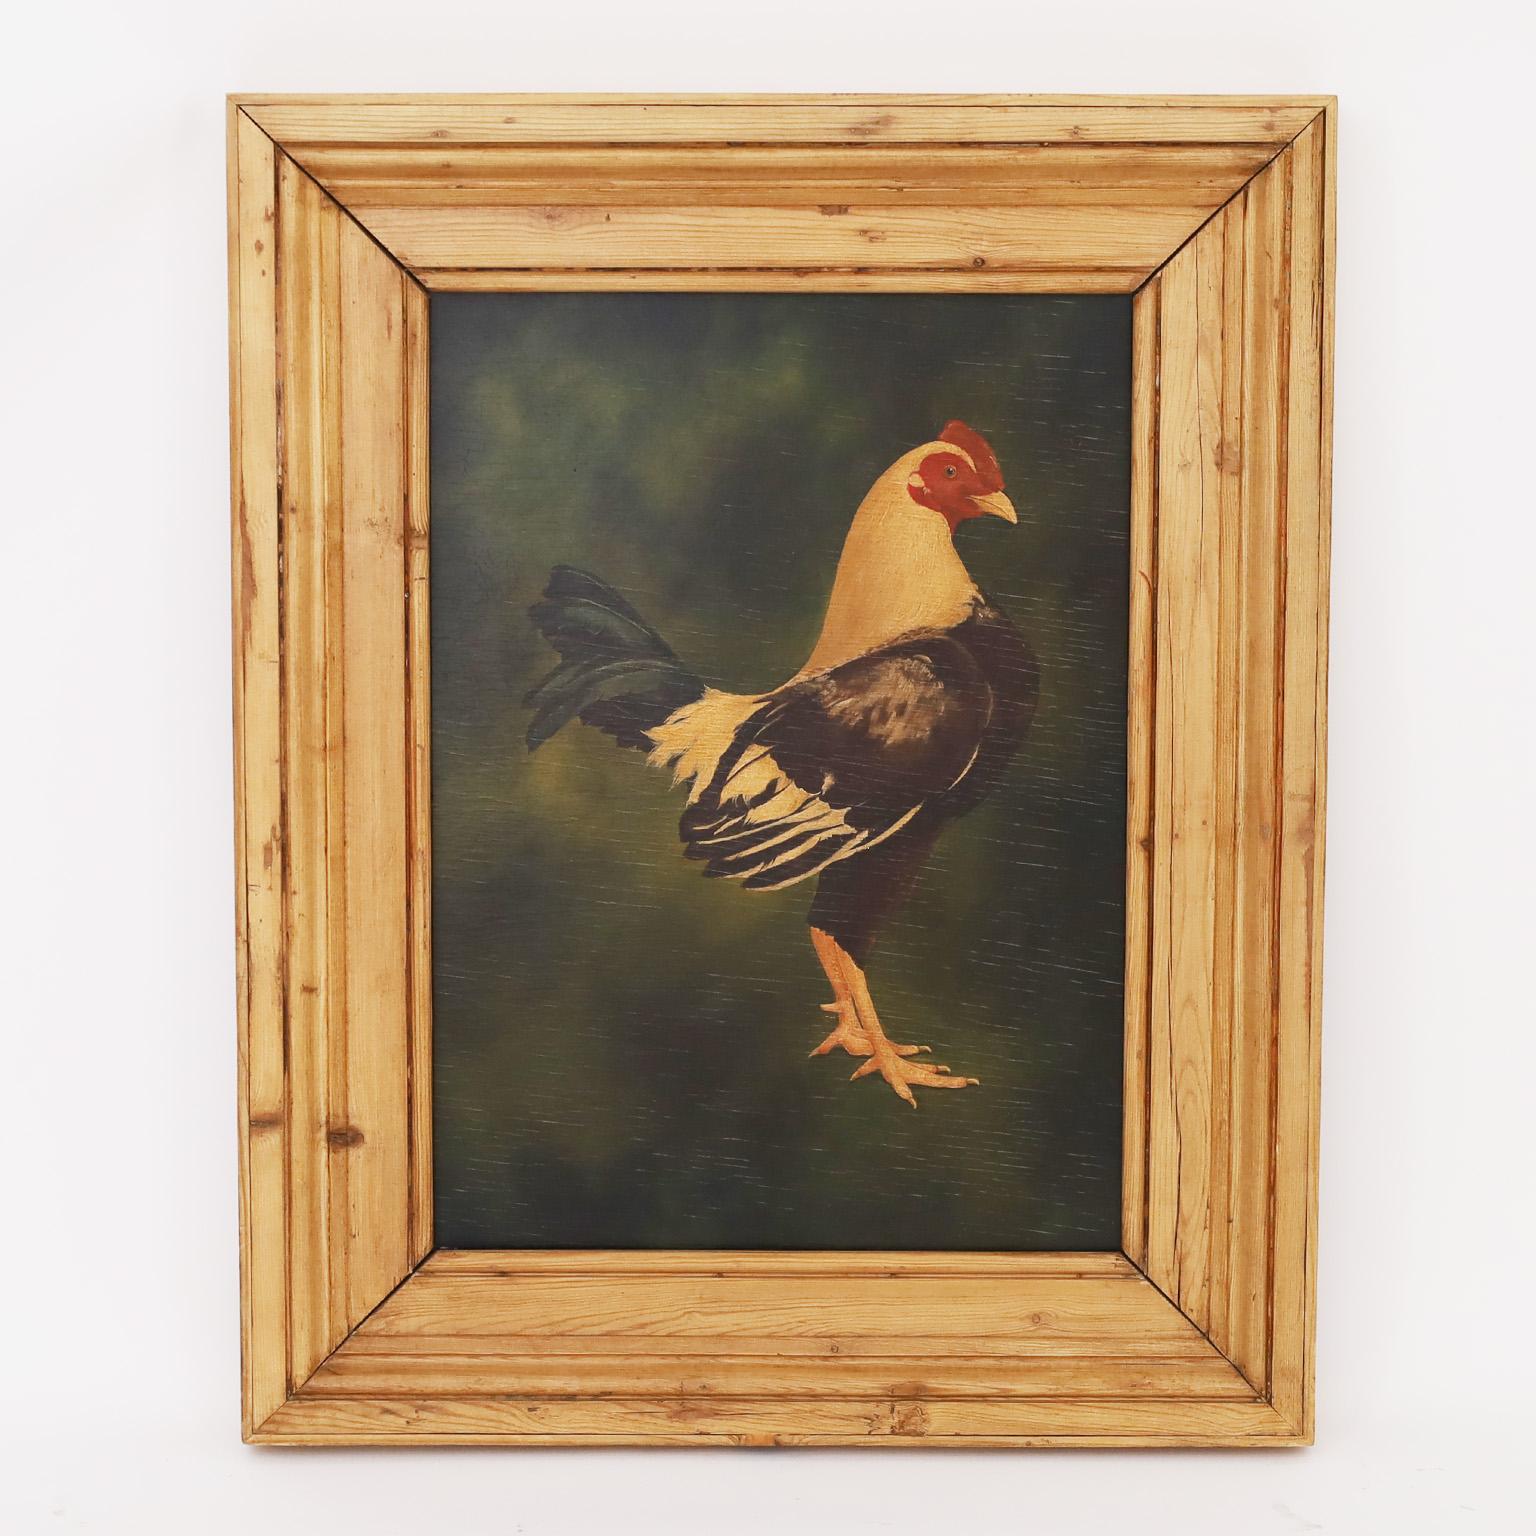 Handsome pair of oil paintings on board depicting prized roosters, executed in a primitive yet decorative technique and presented in impressive pine frames.